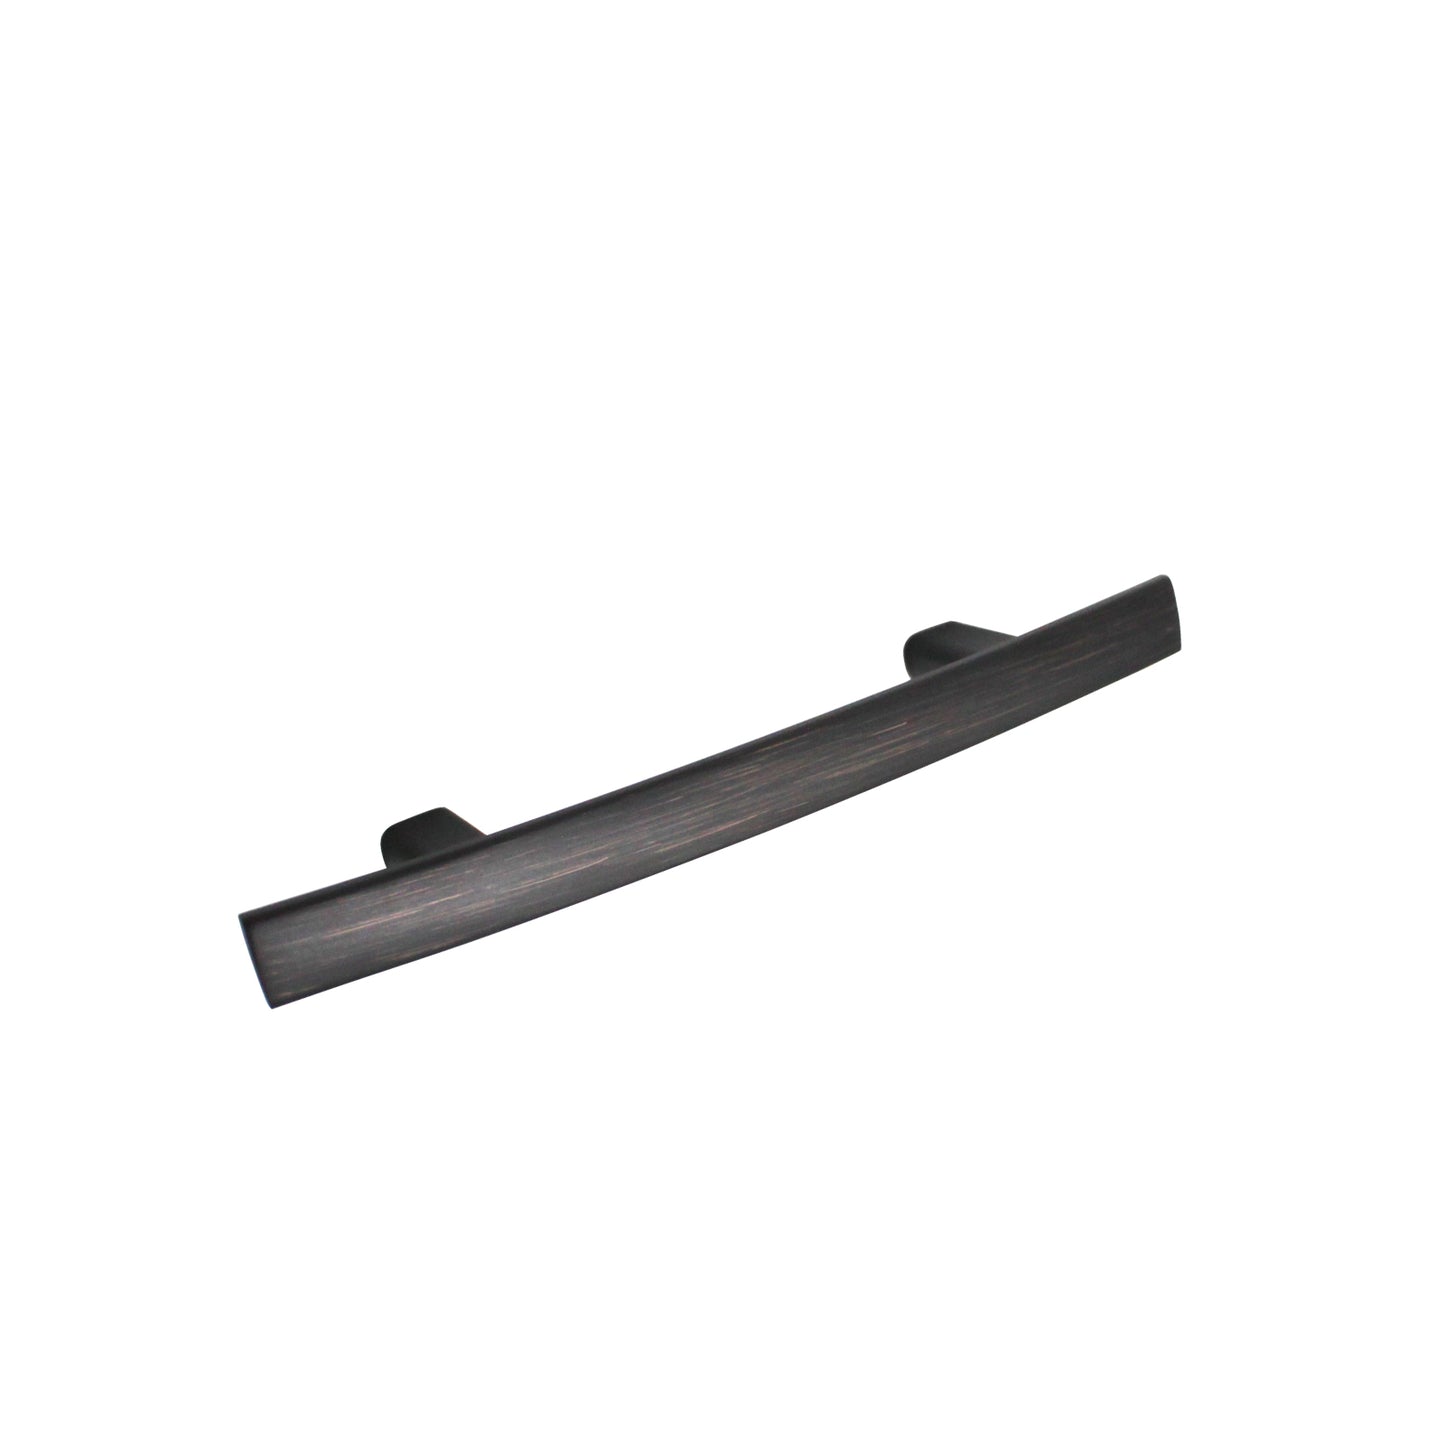 Curved Subtle Arch Cabinet Handles 3inch 76mm Hole Centers Oil Rubbed Bronze Finish PD81670ORB76 - Probrico